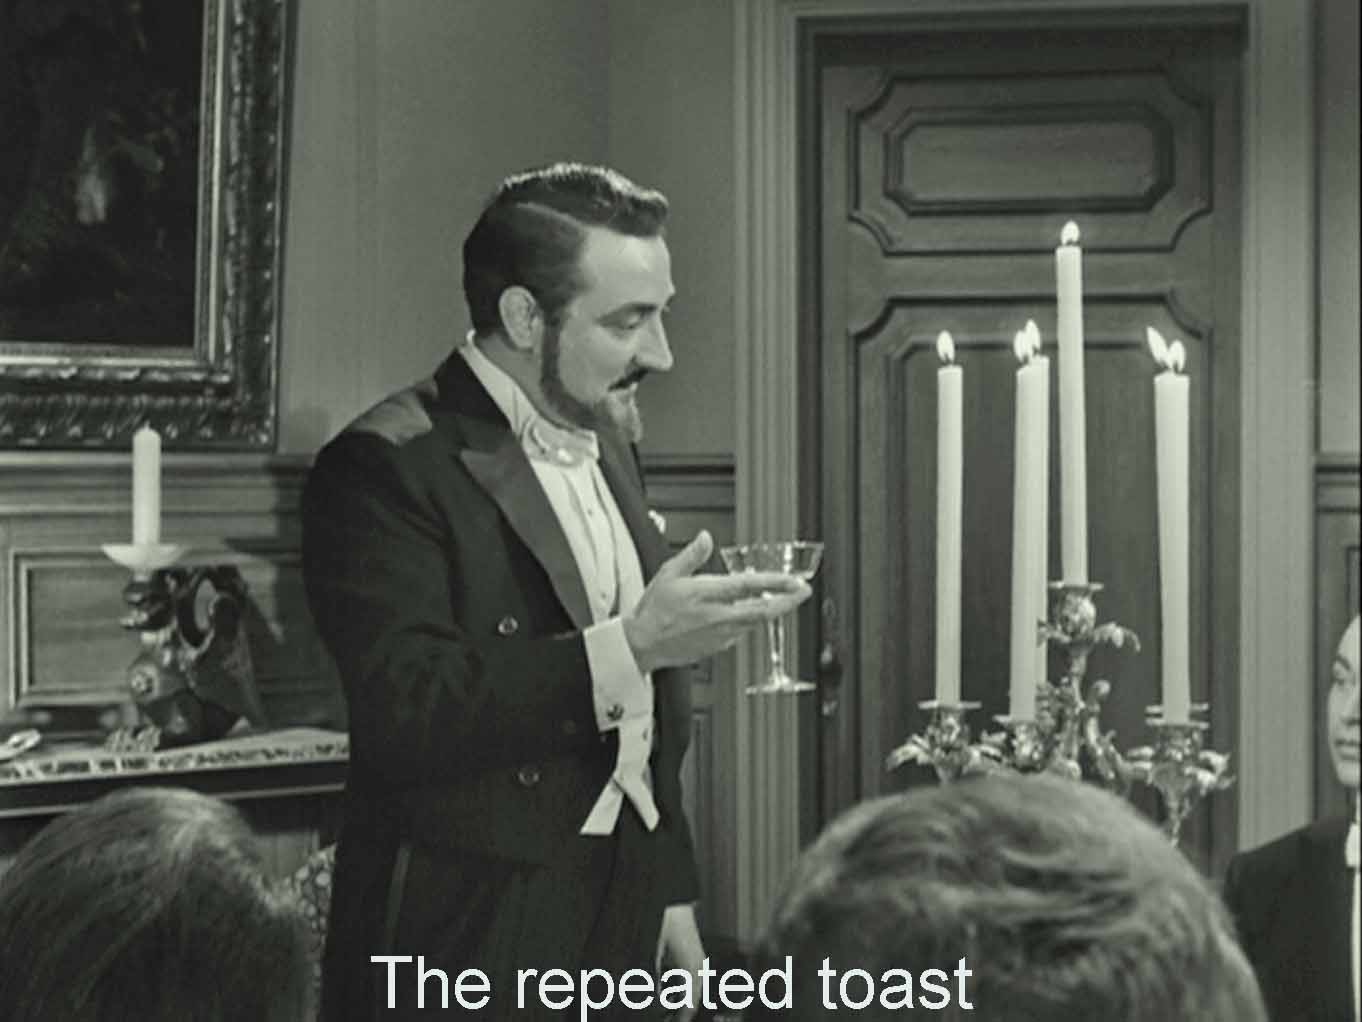 The repeated toast